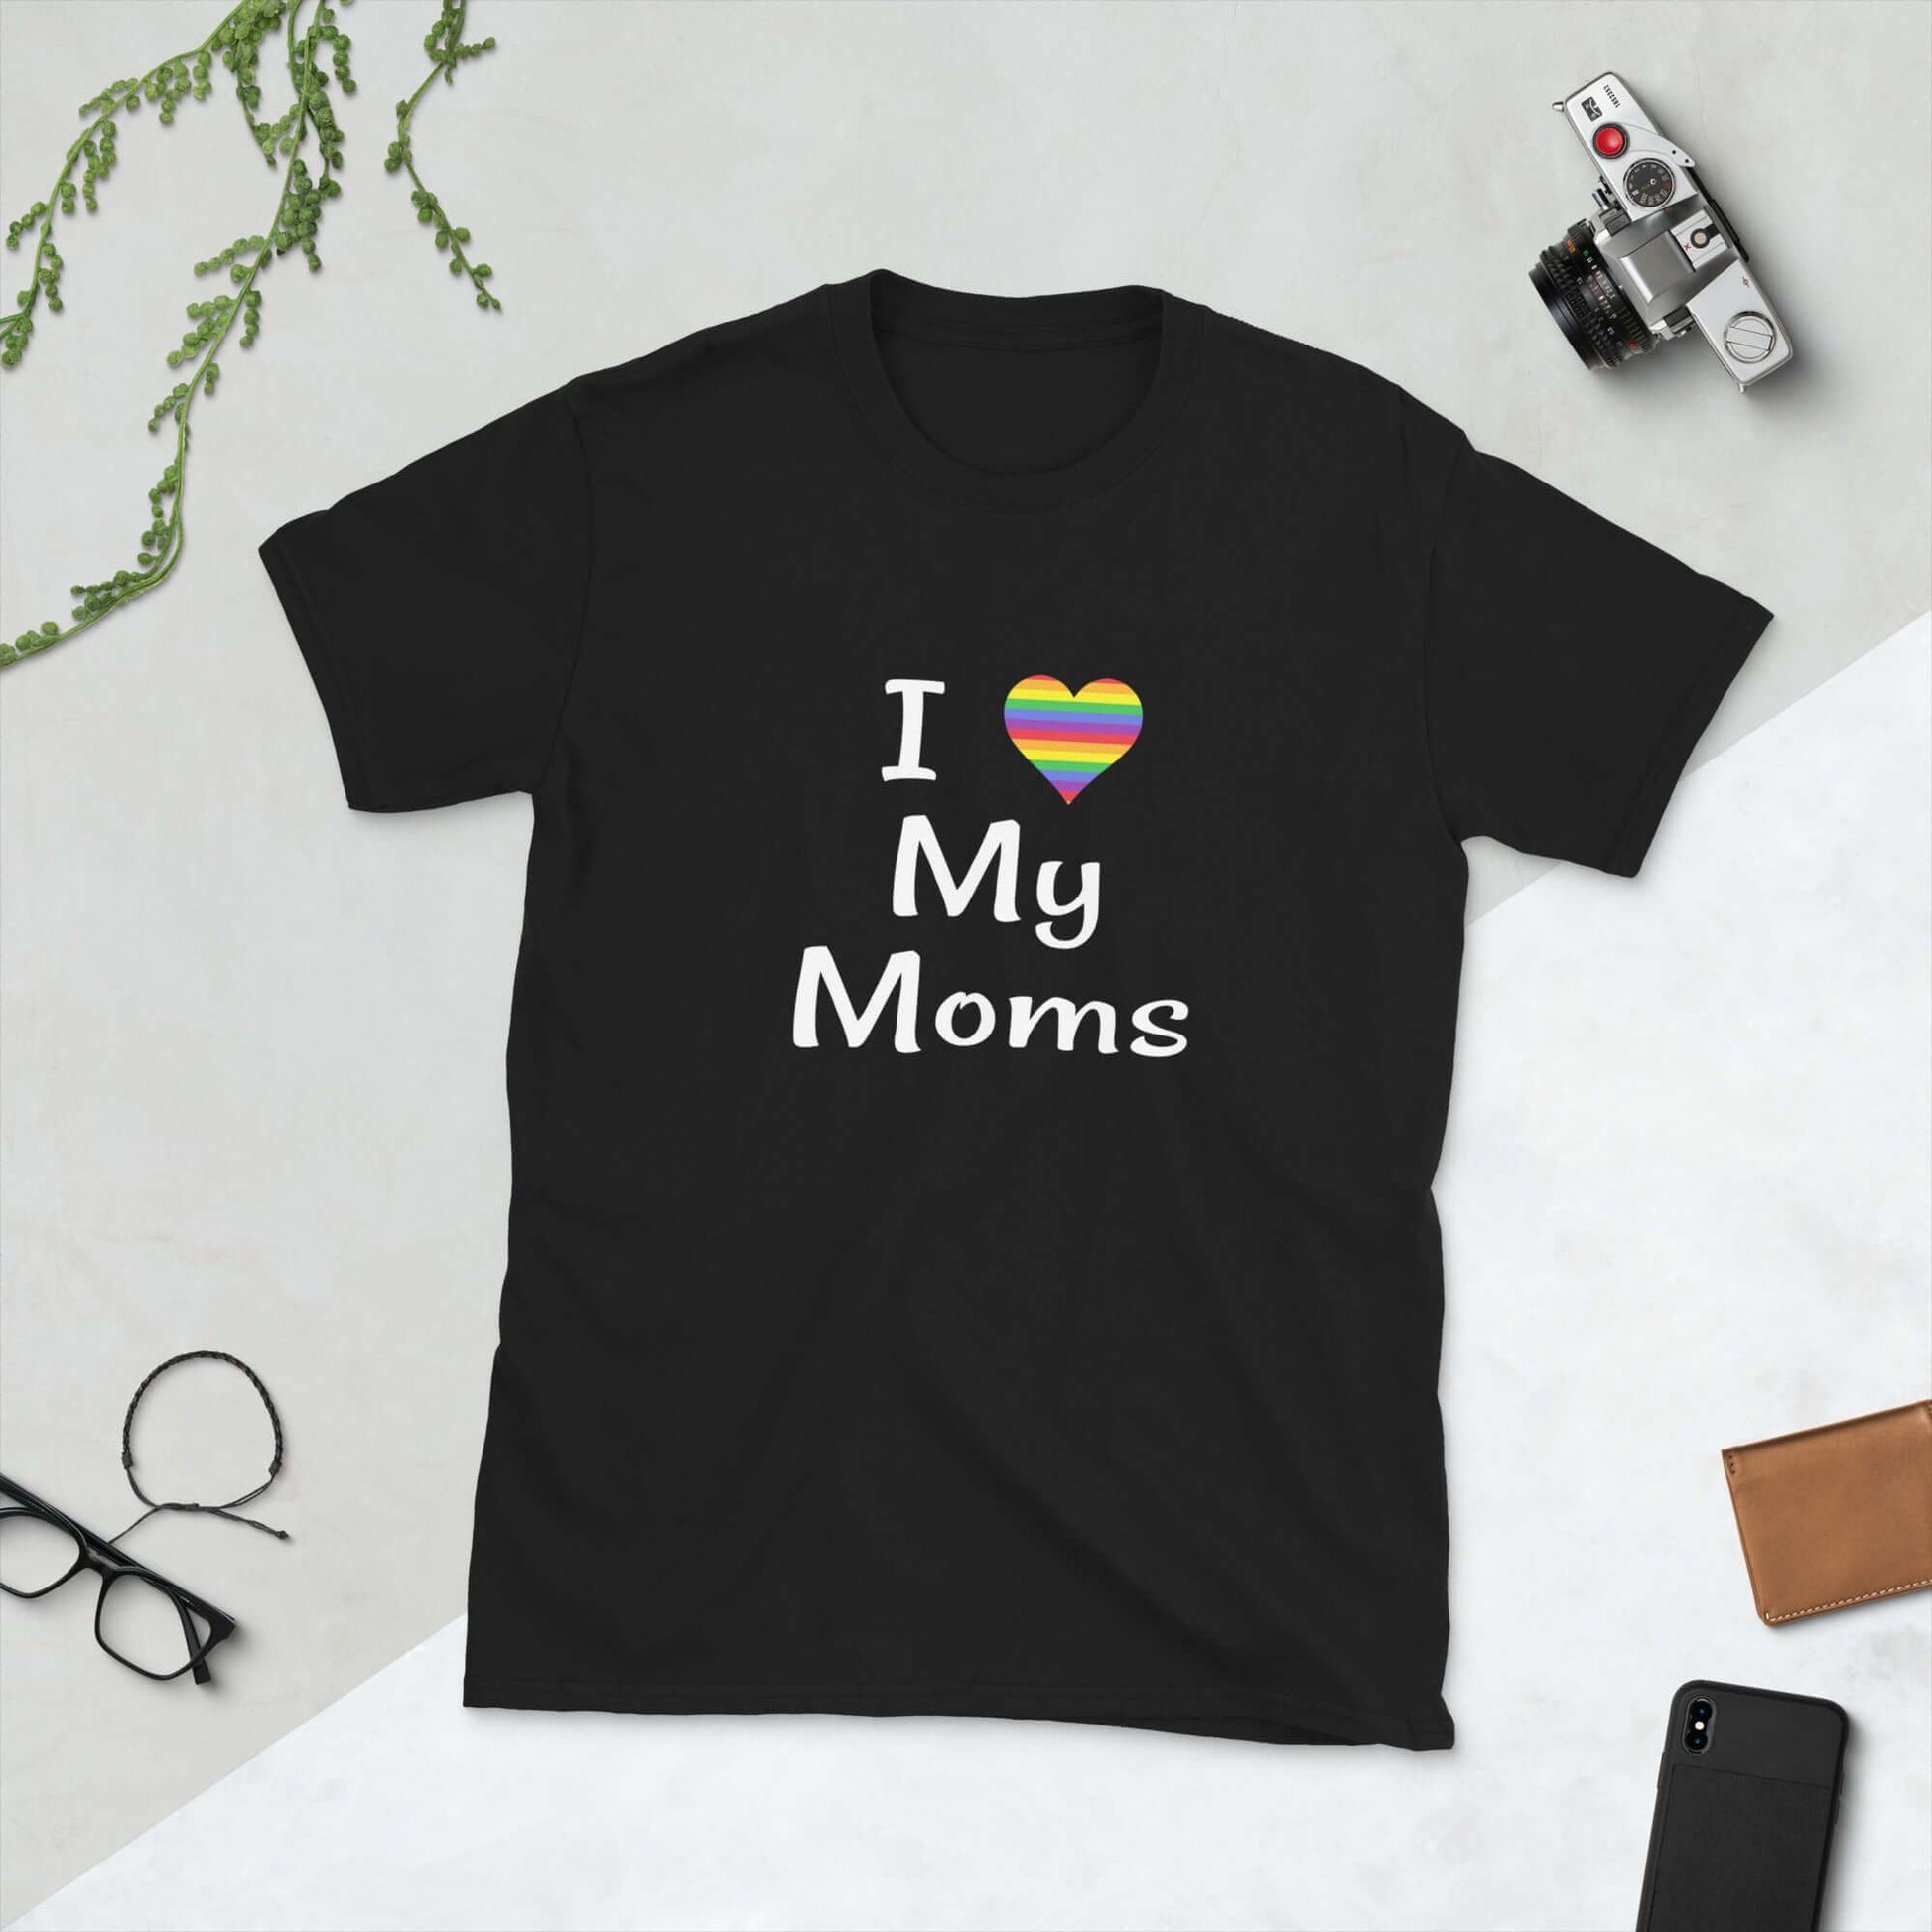 Black t-shirt with I heart my moms printed on the front. The heart is rainbow colors.